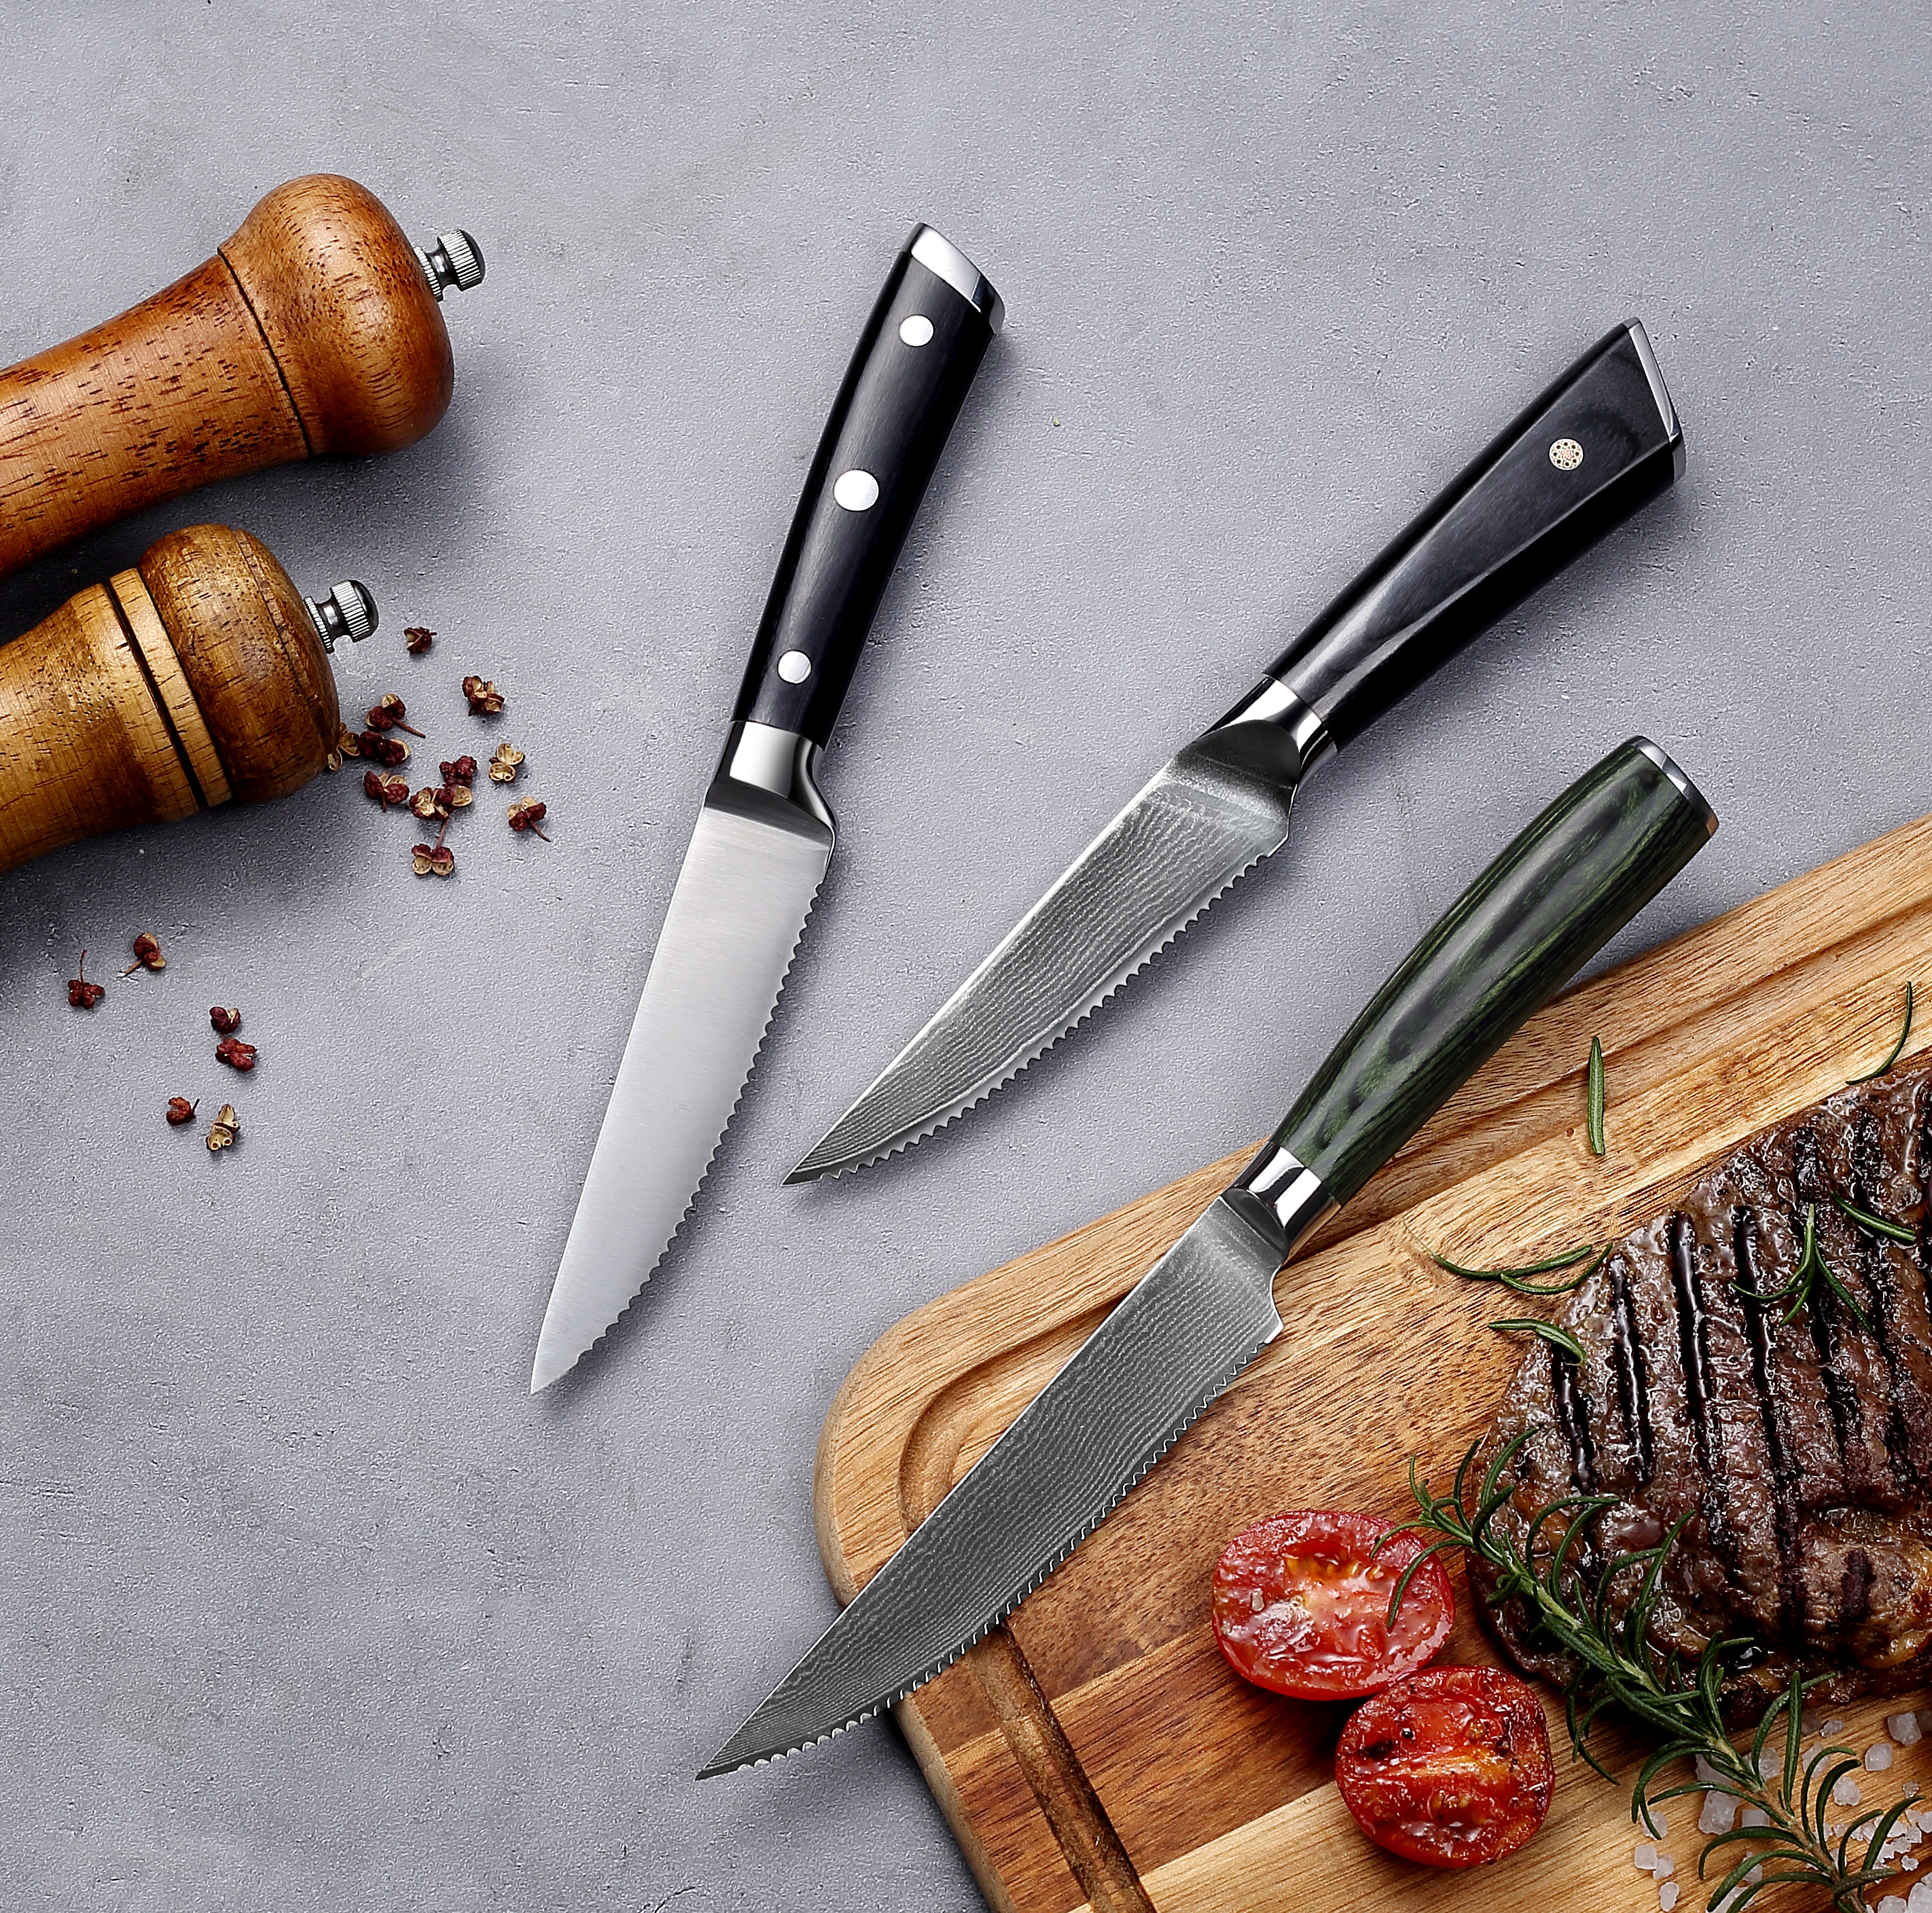 Professional-Grade Steak Knives: Razor Sharp, Full-Tang Stainless Steel Blades for Perfect Cuts